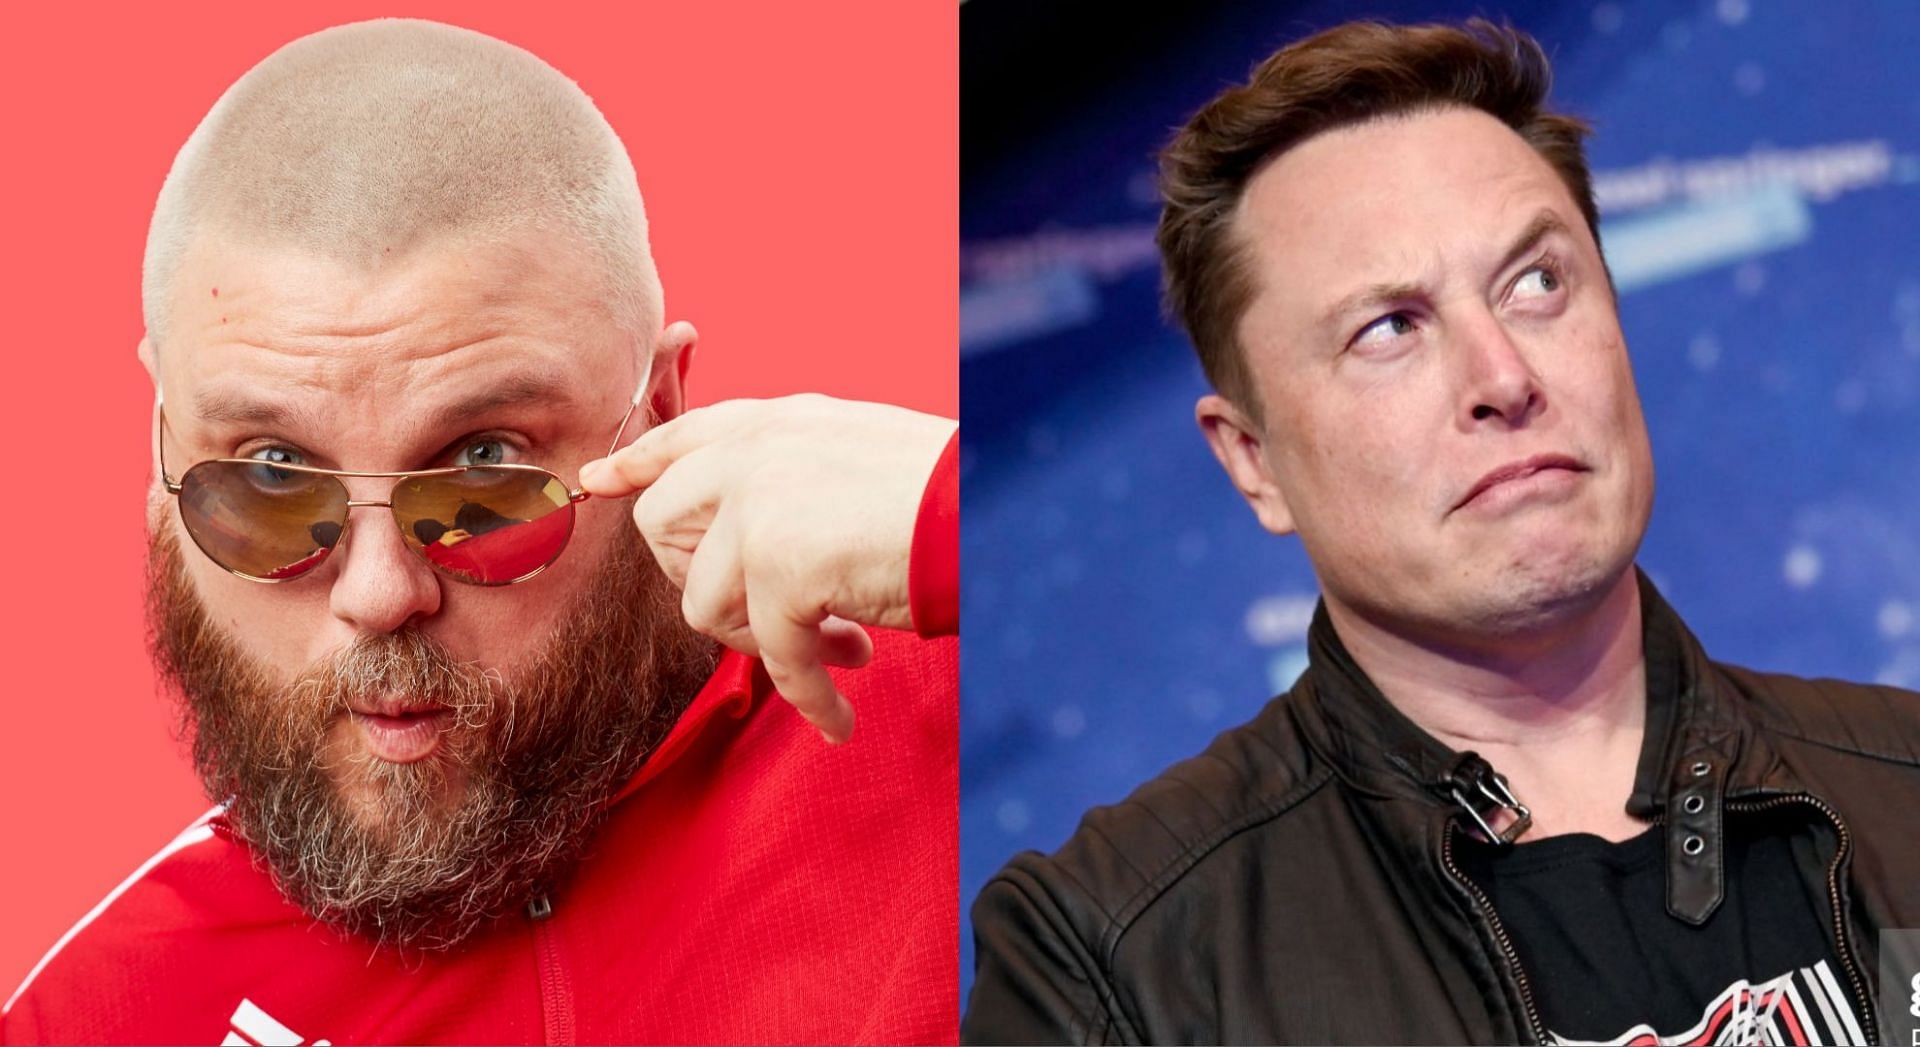 Elon Musk and Halli Thorleifsson recently engaged in a Twitter debate over the latter